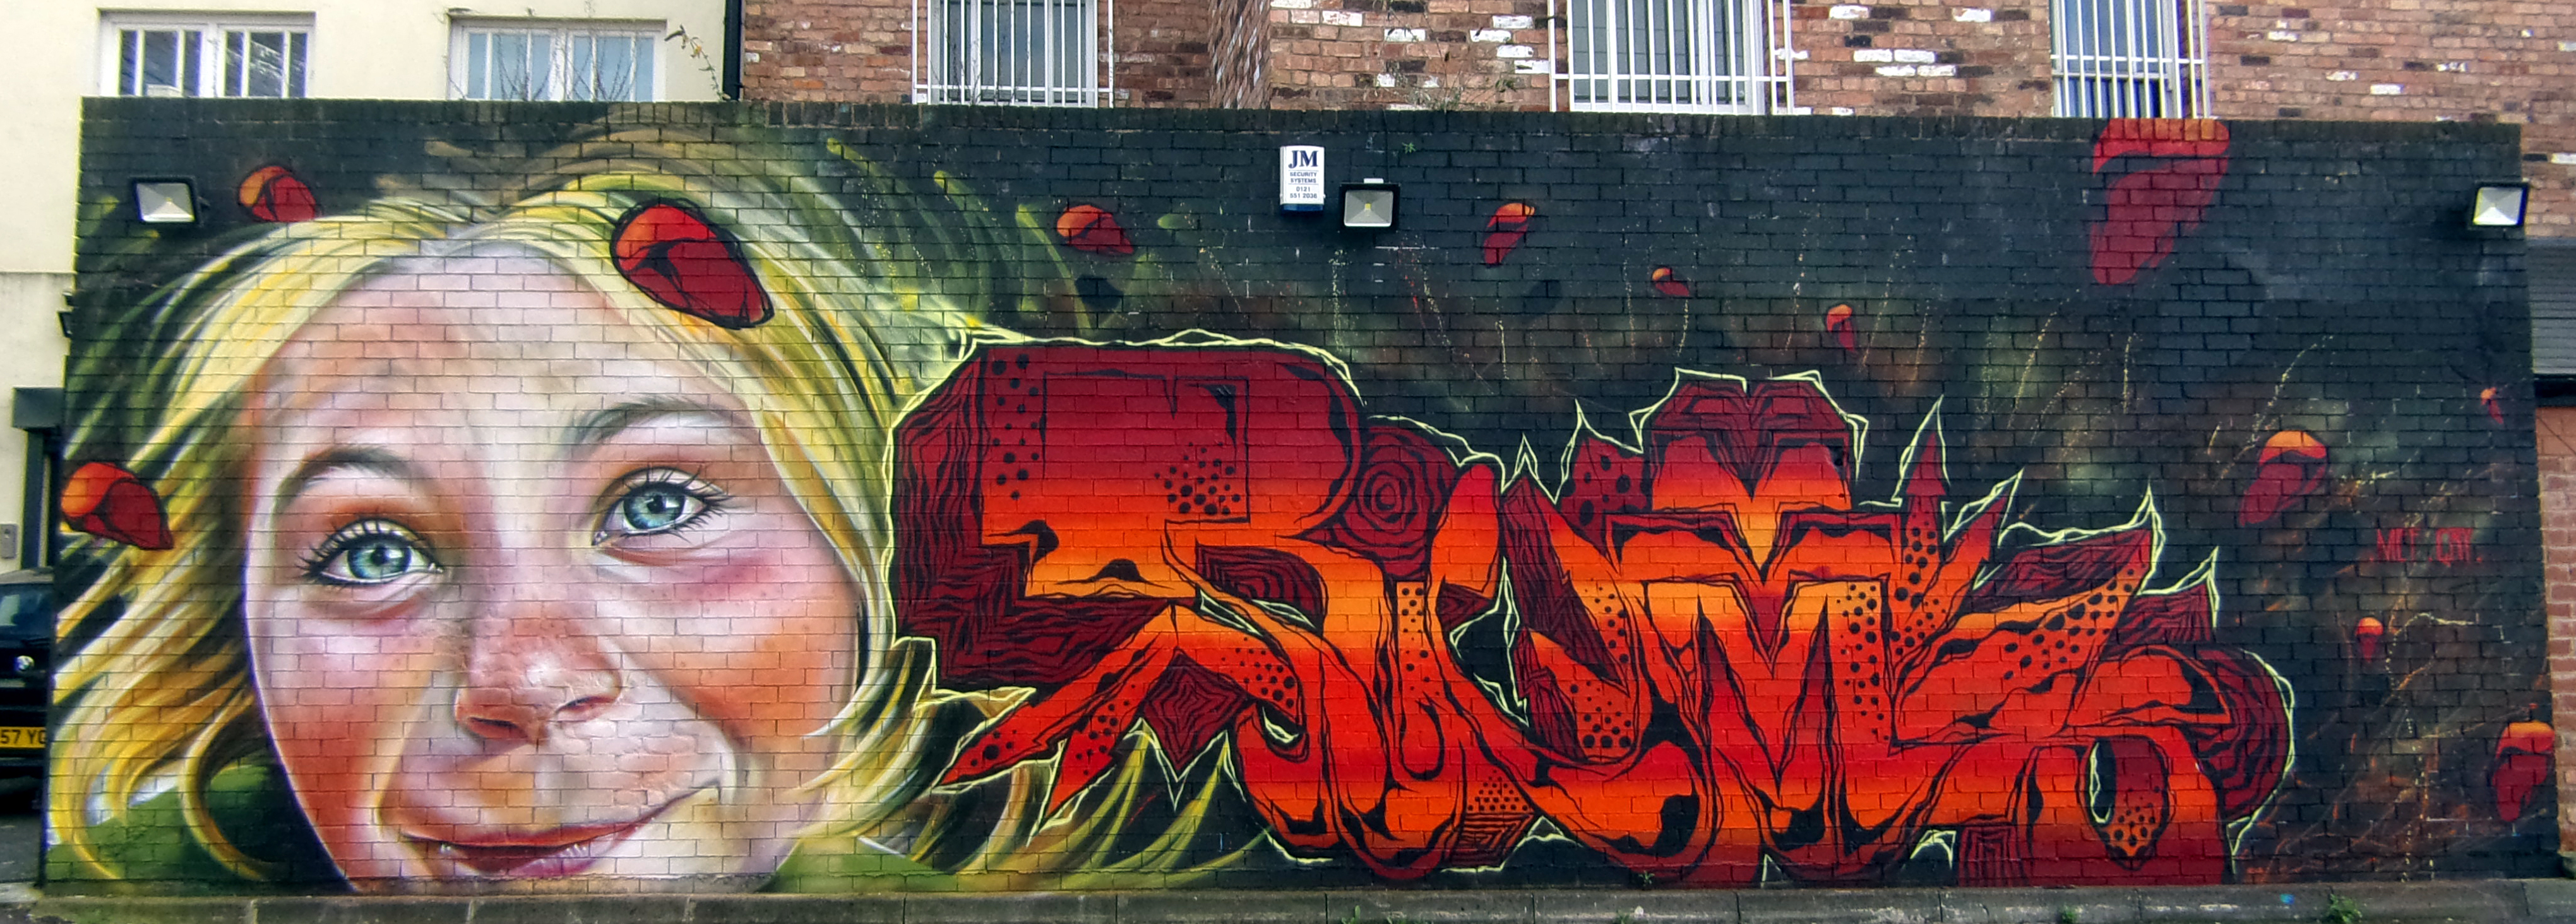 Graffiti 6542  by the artist IRONY captured by Mephisroth in London United Kingdom